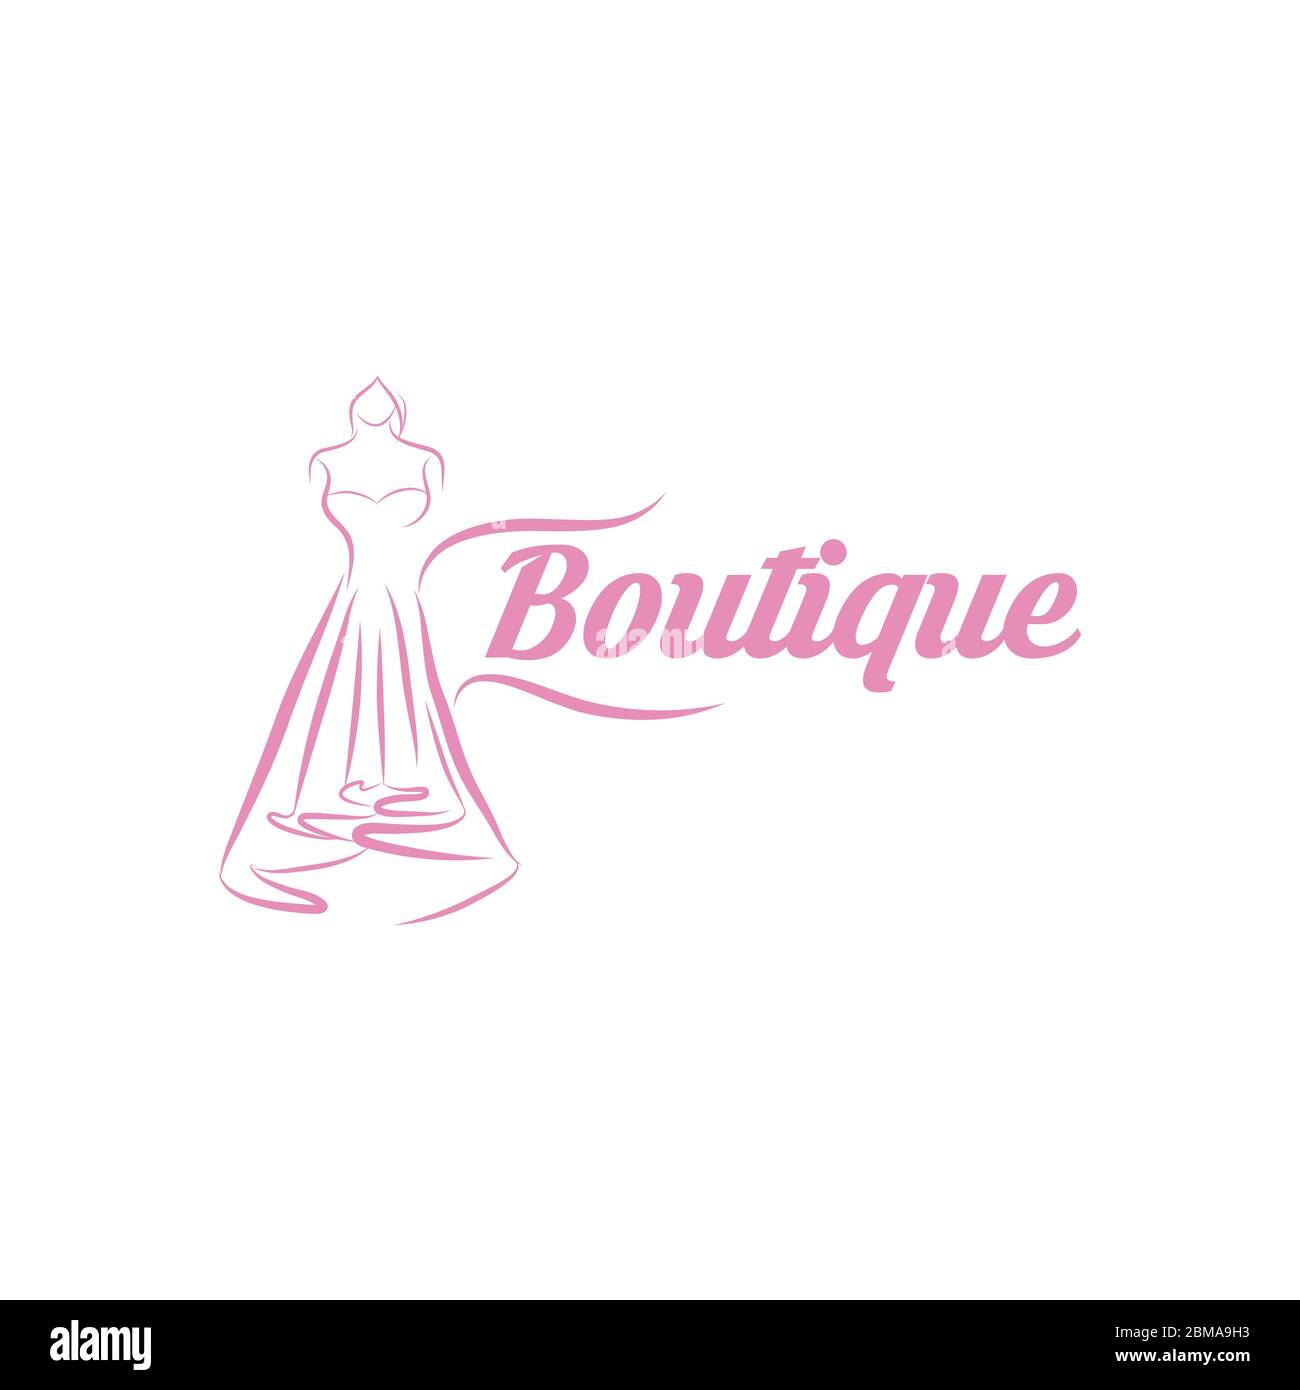 boutique logo with text space for your slogan / tagline, vector illustration. Stock Vector